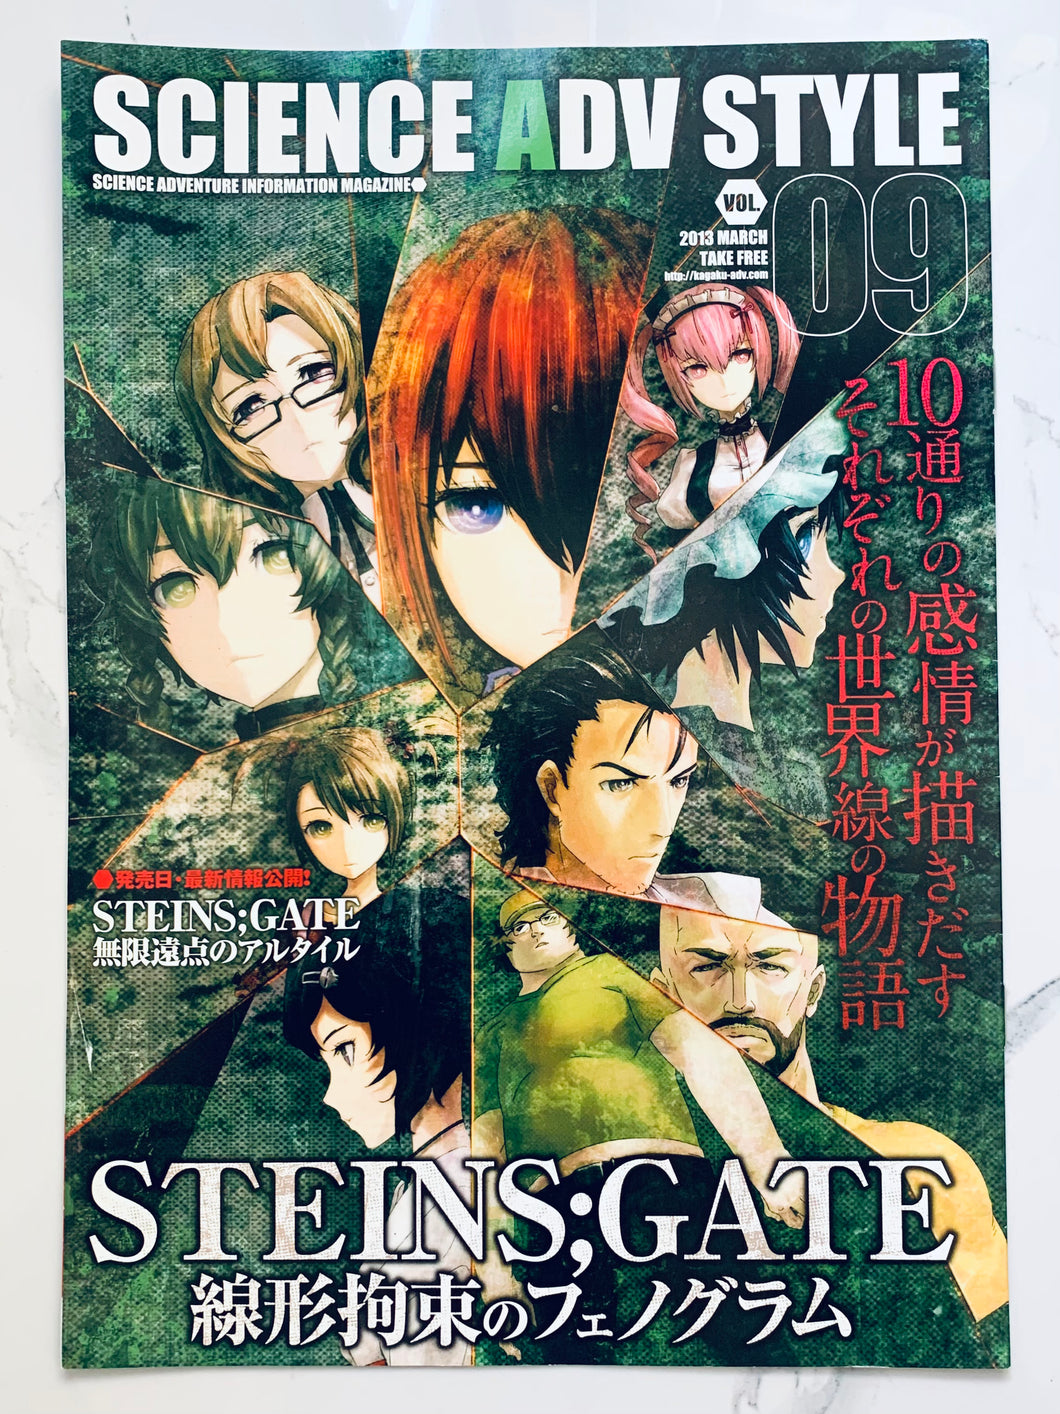 Science Style Adv Vol. 09 March 2013 Steins;Gate